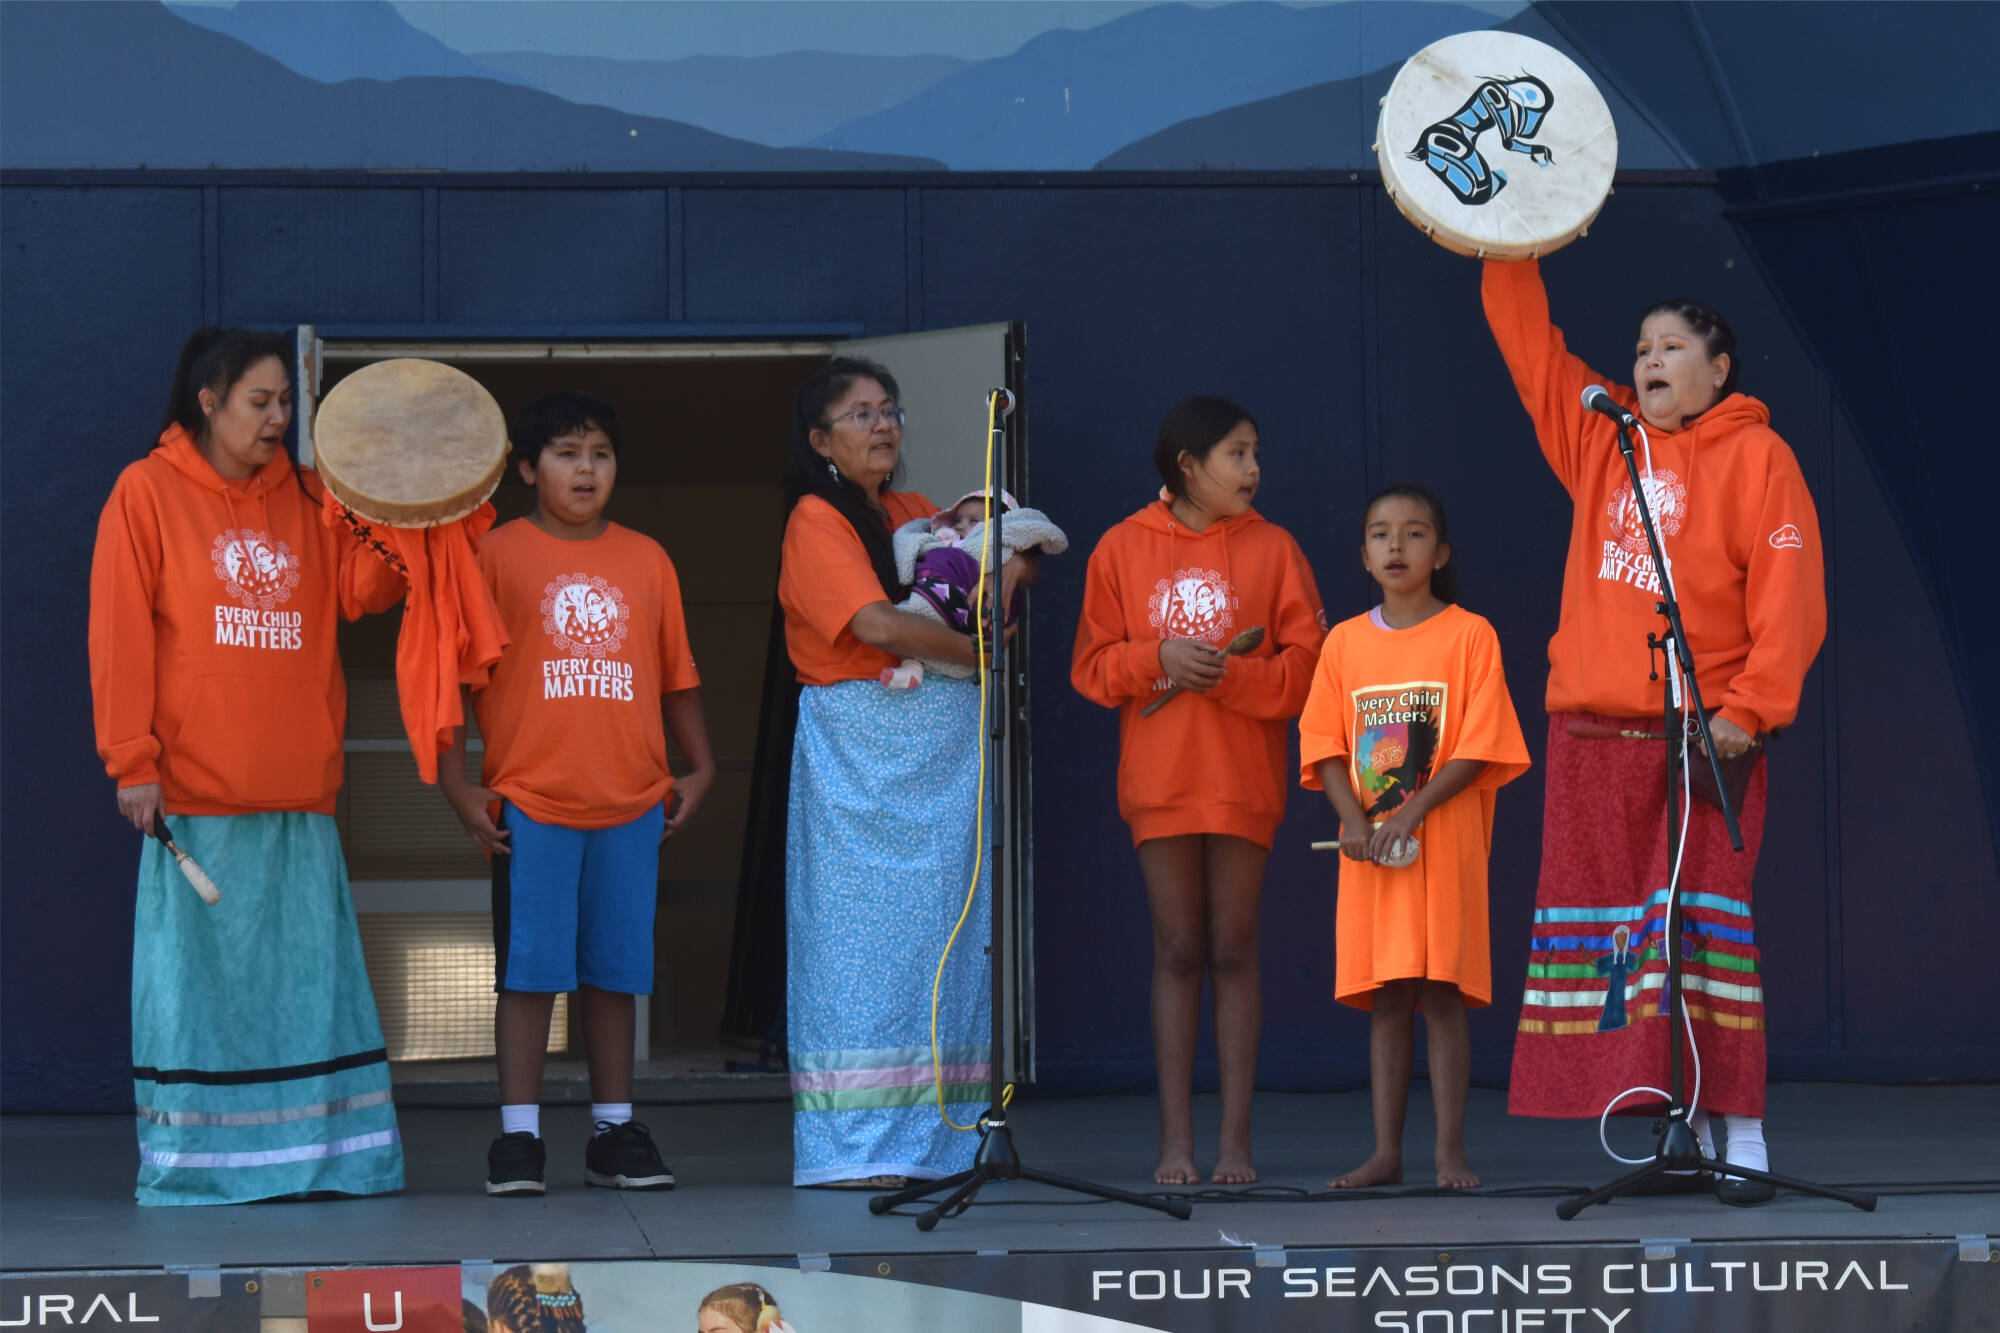 Three generations of Penticton's Jack family sang the Okanagan Song to start the Celebration of Indigenous Culture and Resiliency in Penticton's Gyro Park on the second National Day of Truth and Reconciliation. (Brennan Phillips - Western News)